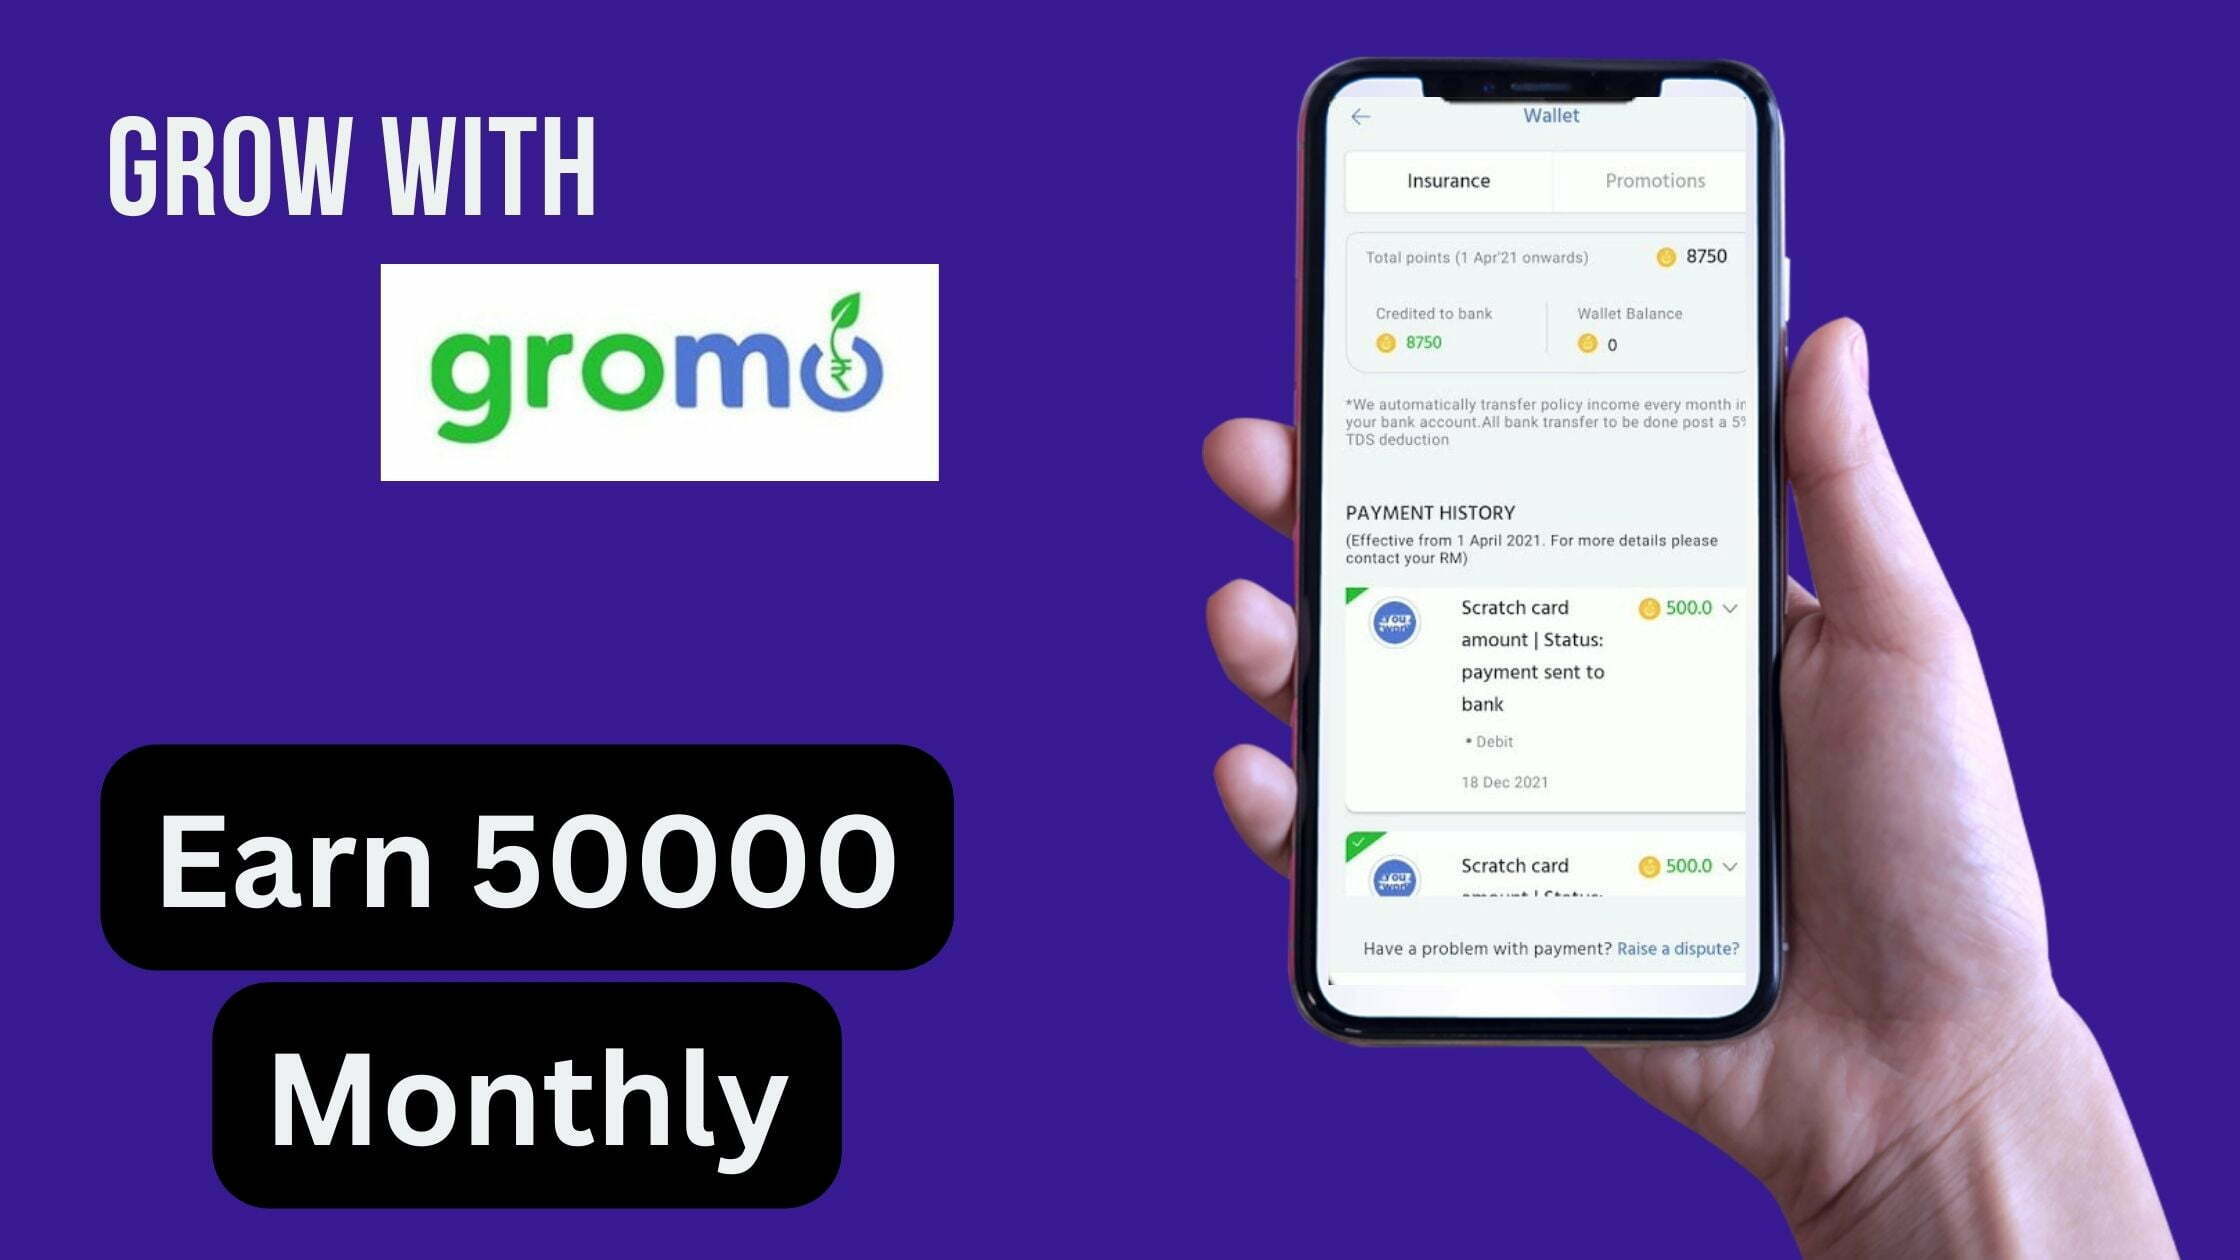 How to Earn Rs. 50000 With Gromo App